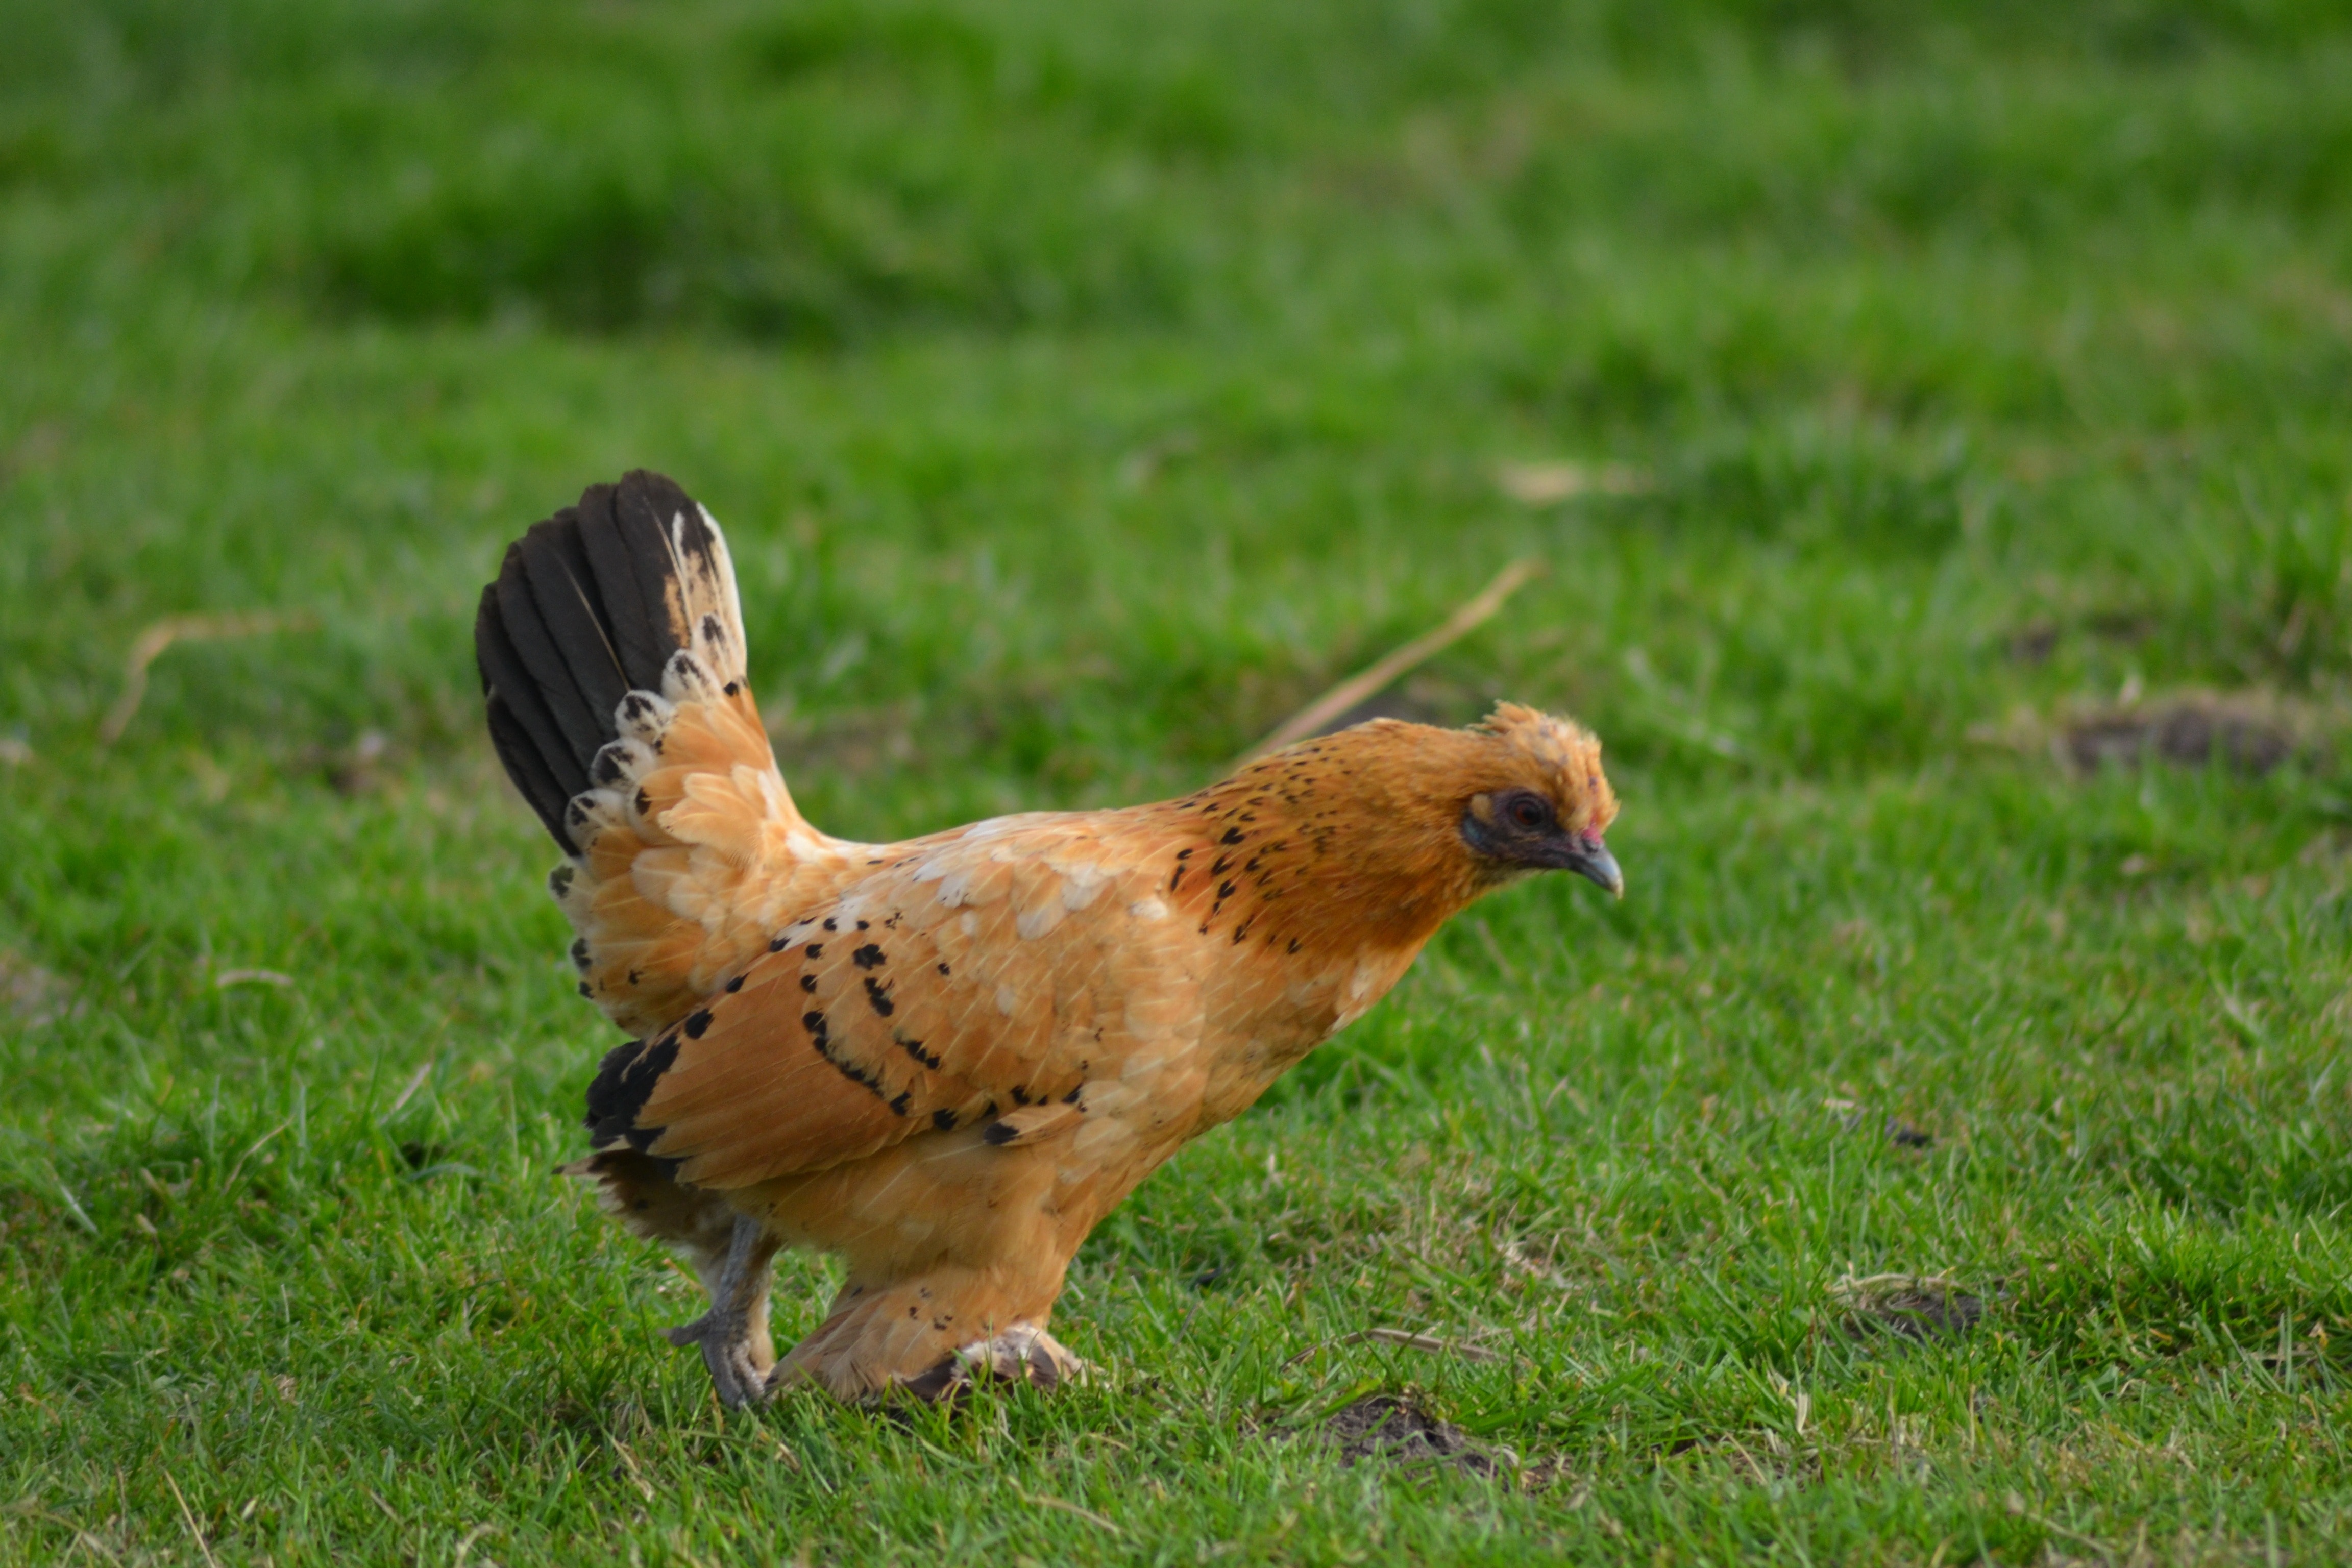 photography of chicken walking on green grass field during daytime